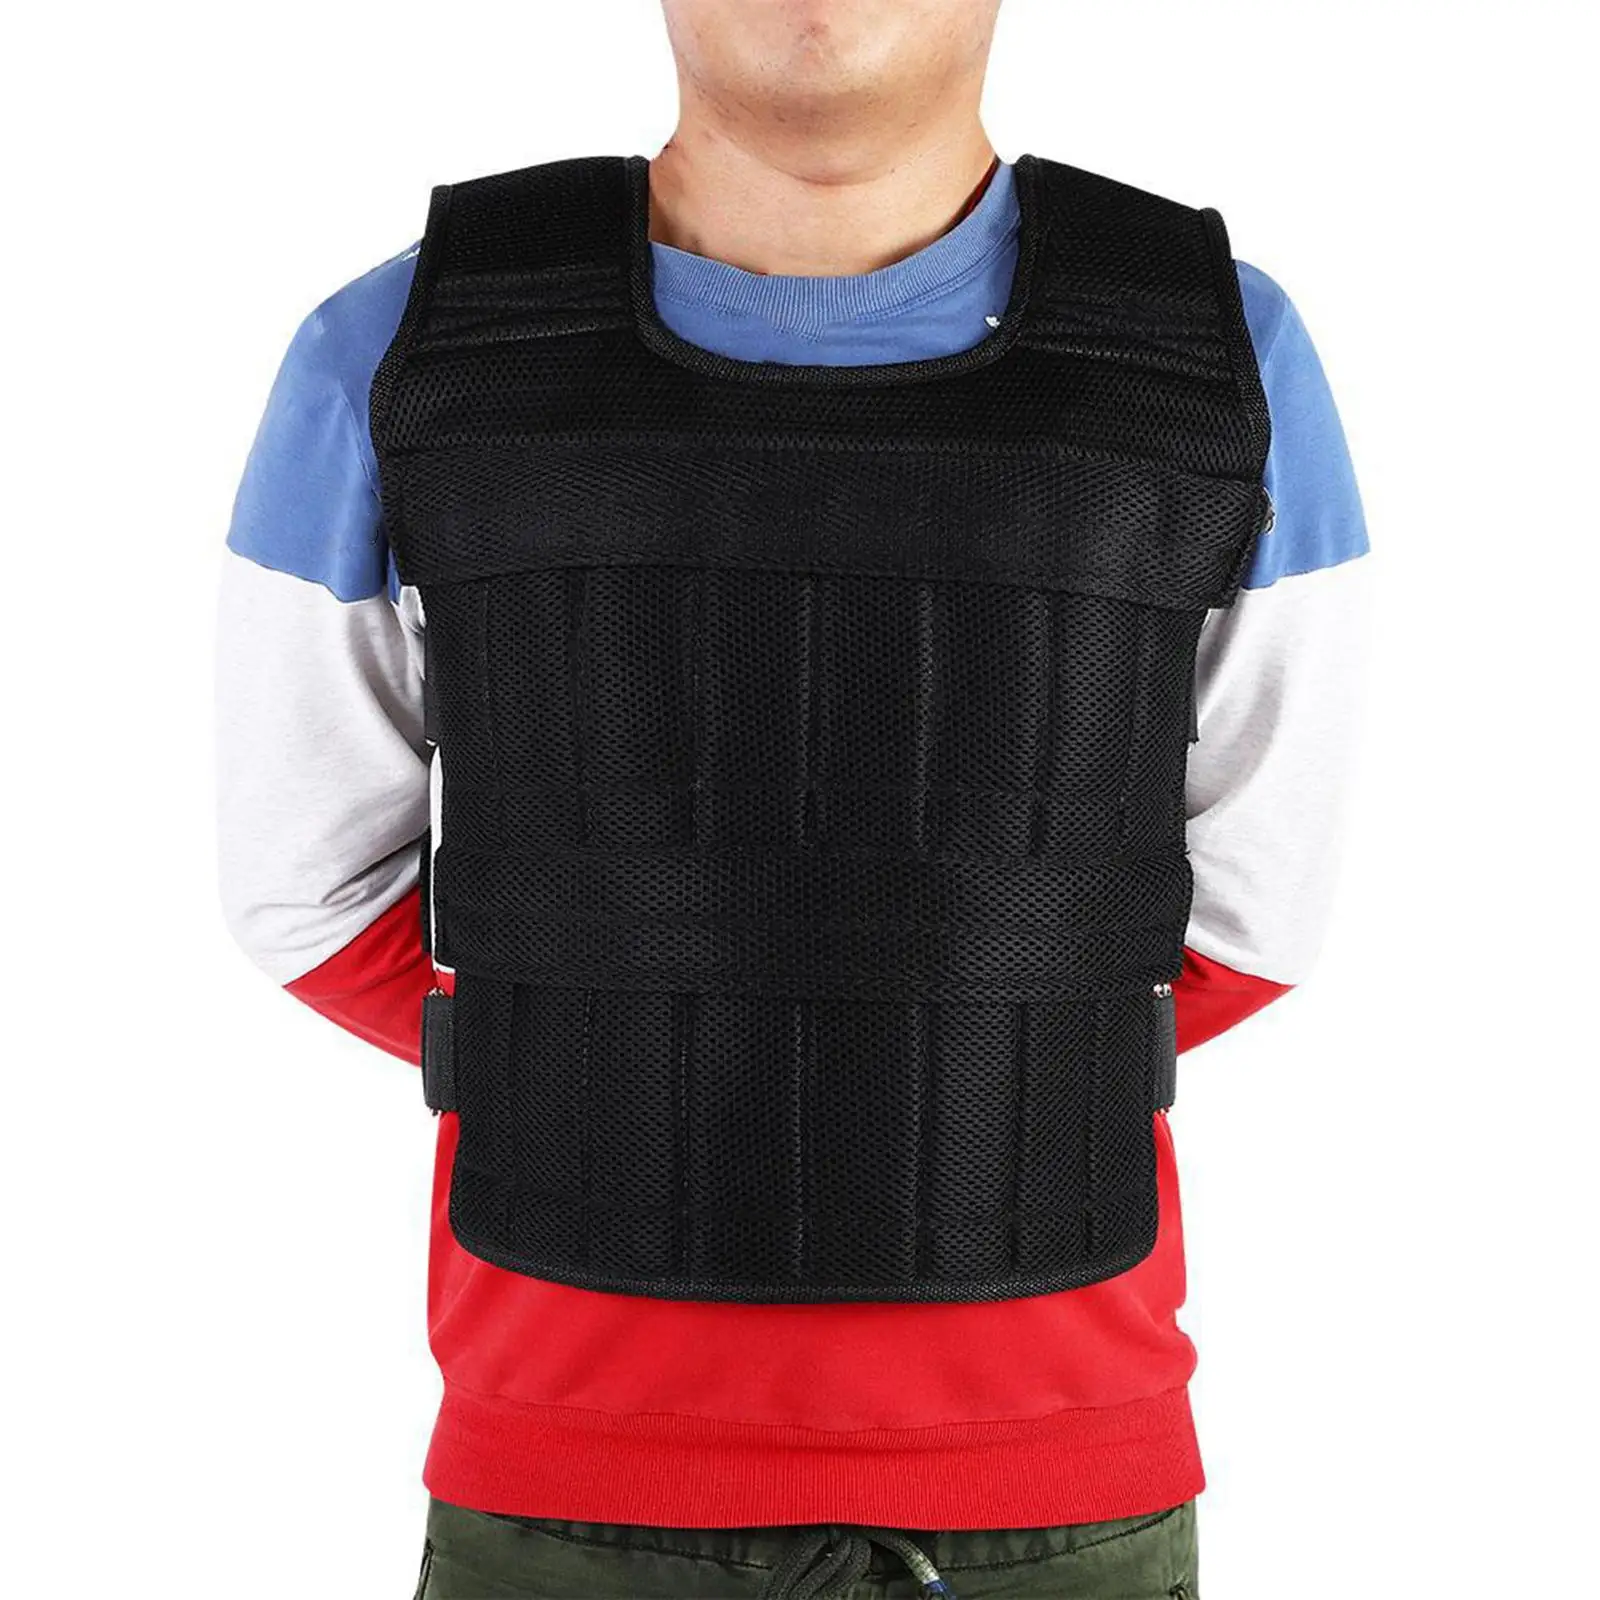 50KG Weight Vest For Boxing Weight Training  Gym Equipment Adjustable Waistcoat Jacket sand cloth